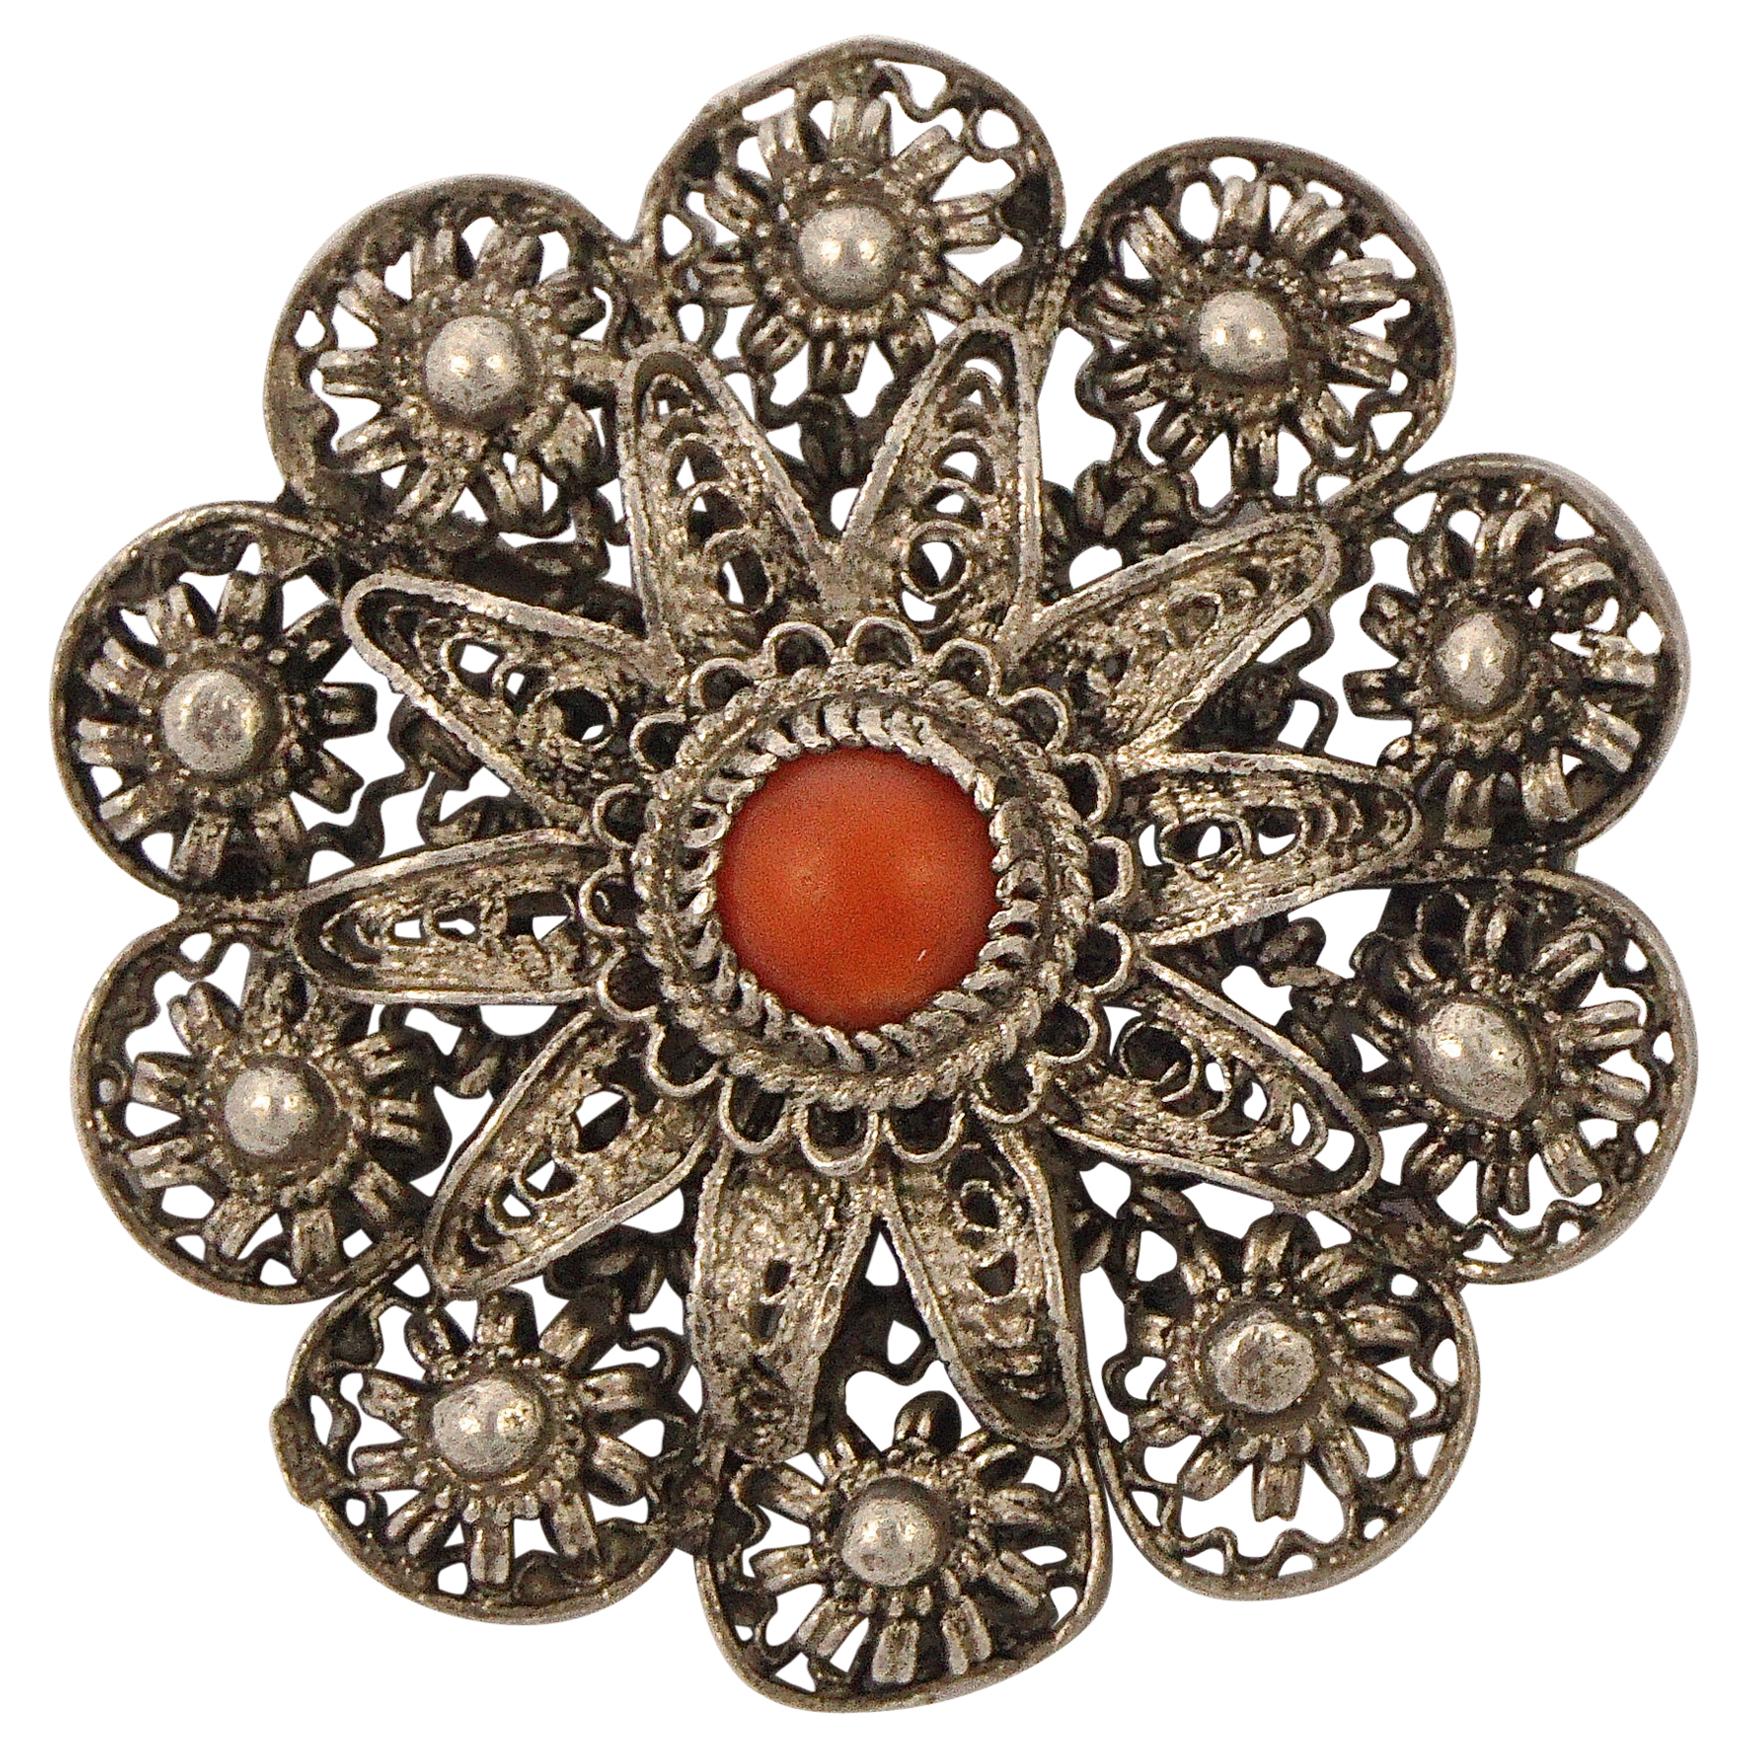 Chinese Export Round Silver Filigree Cannetille and Coral Brooch circa 1930s